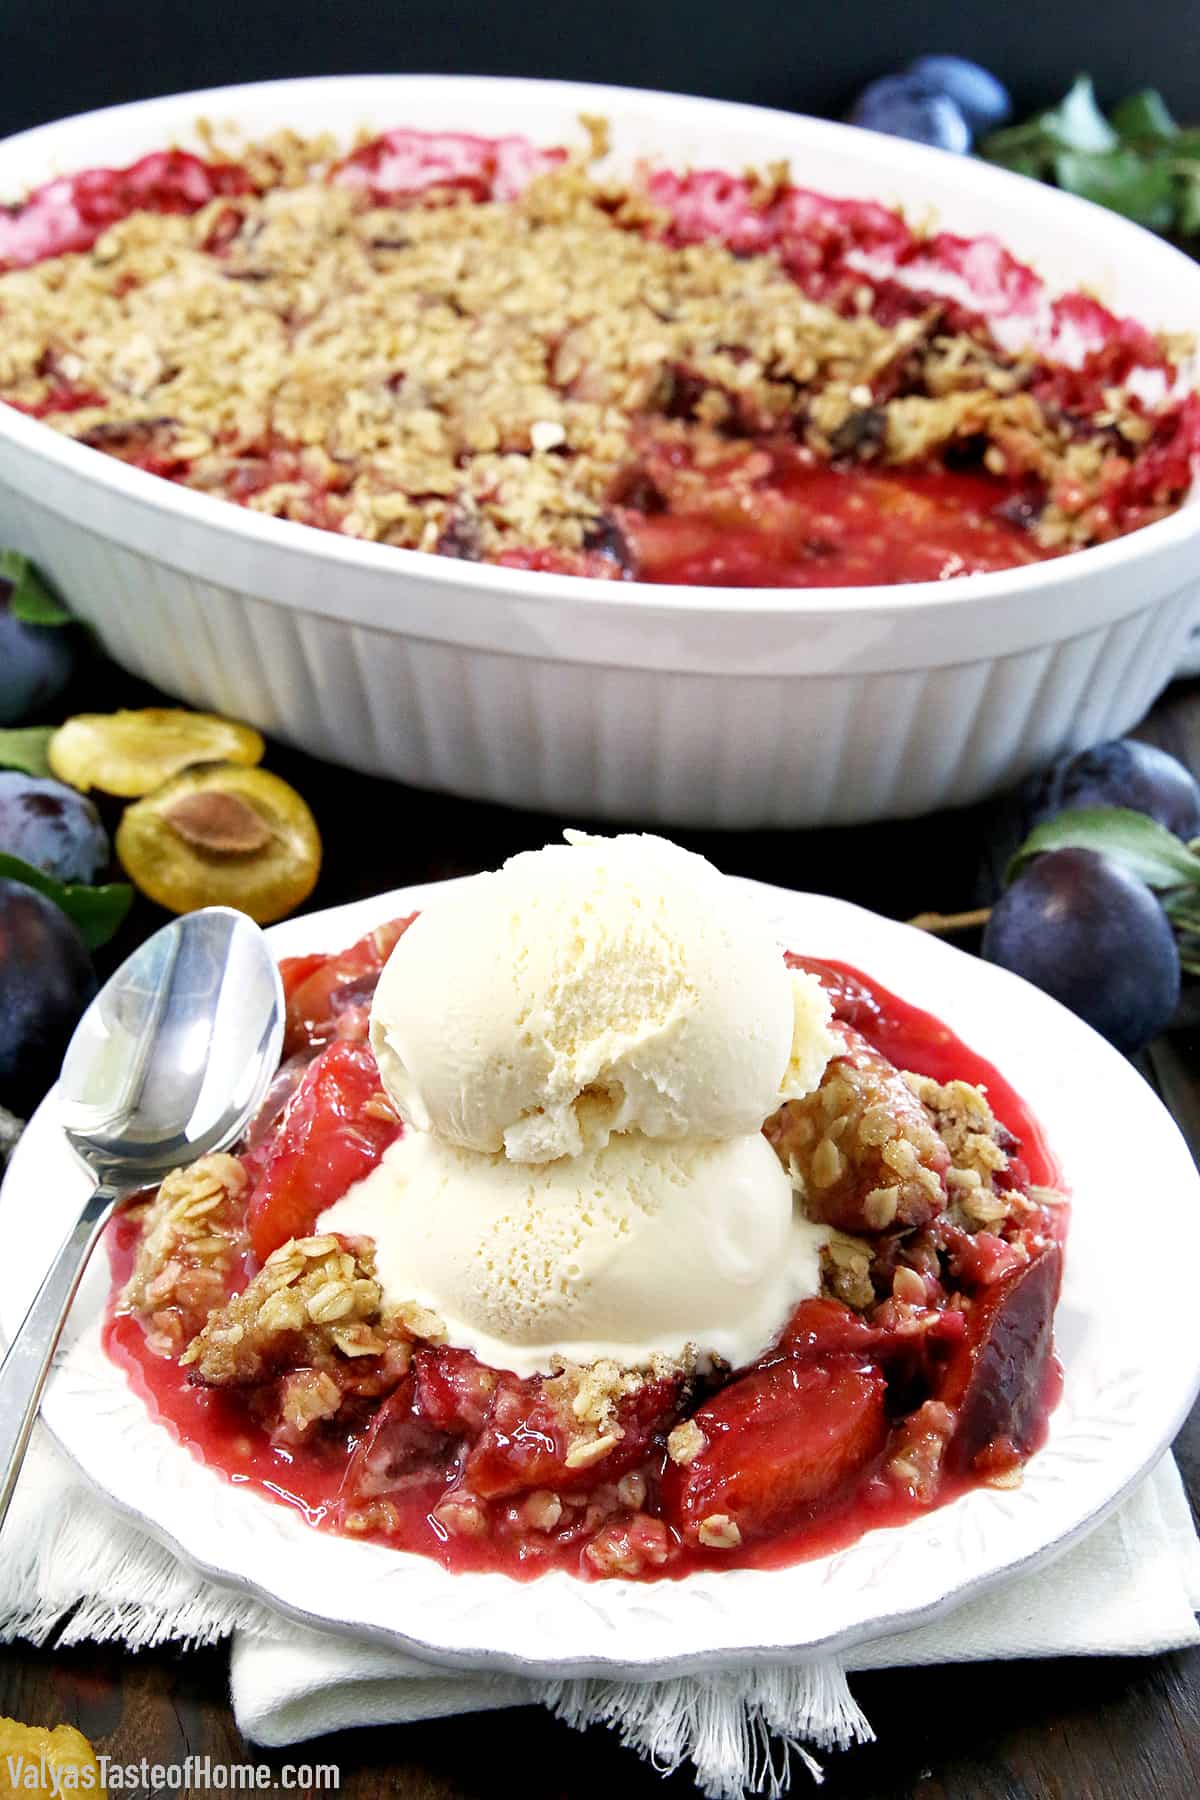 If your plum tree is overloaded with the fruit and you don't know what to do with them, try this recipe out! This is The Best Plum Crisp Recipe you'll ever taste! The crunchy and delicious oats topping is guaranteed to leave you wanting more. 